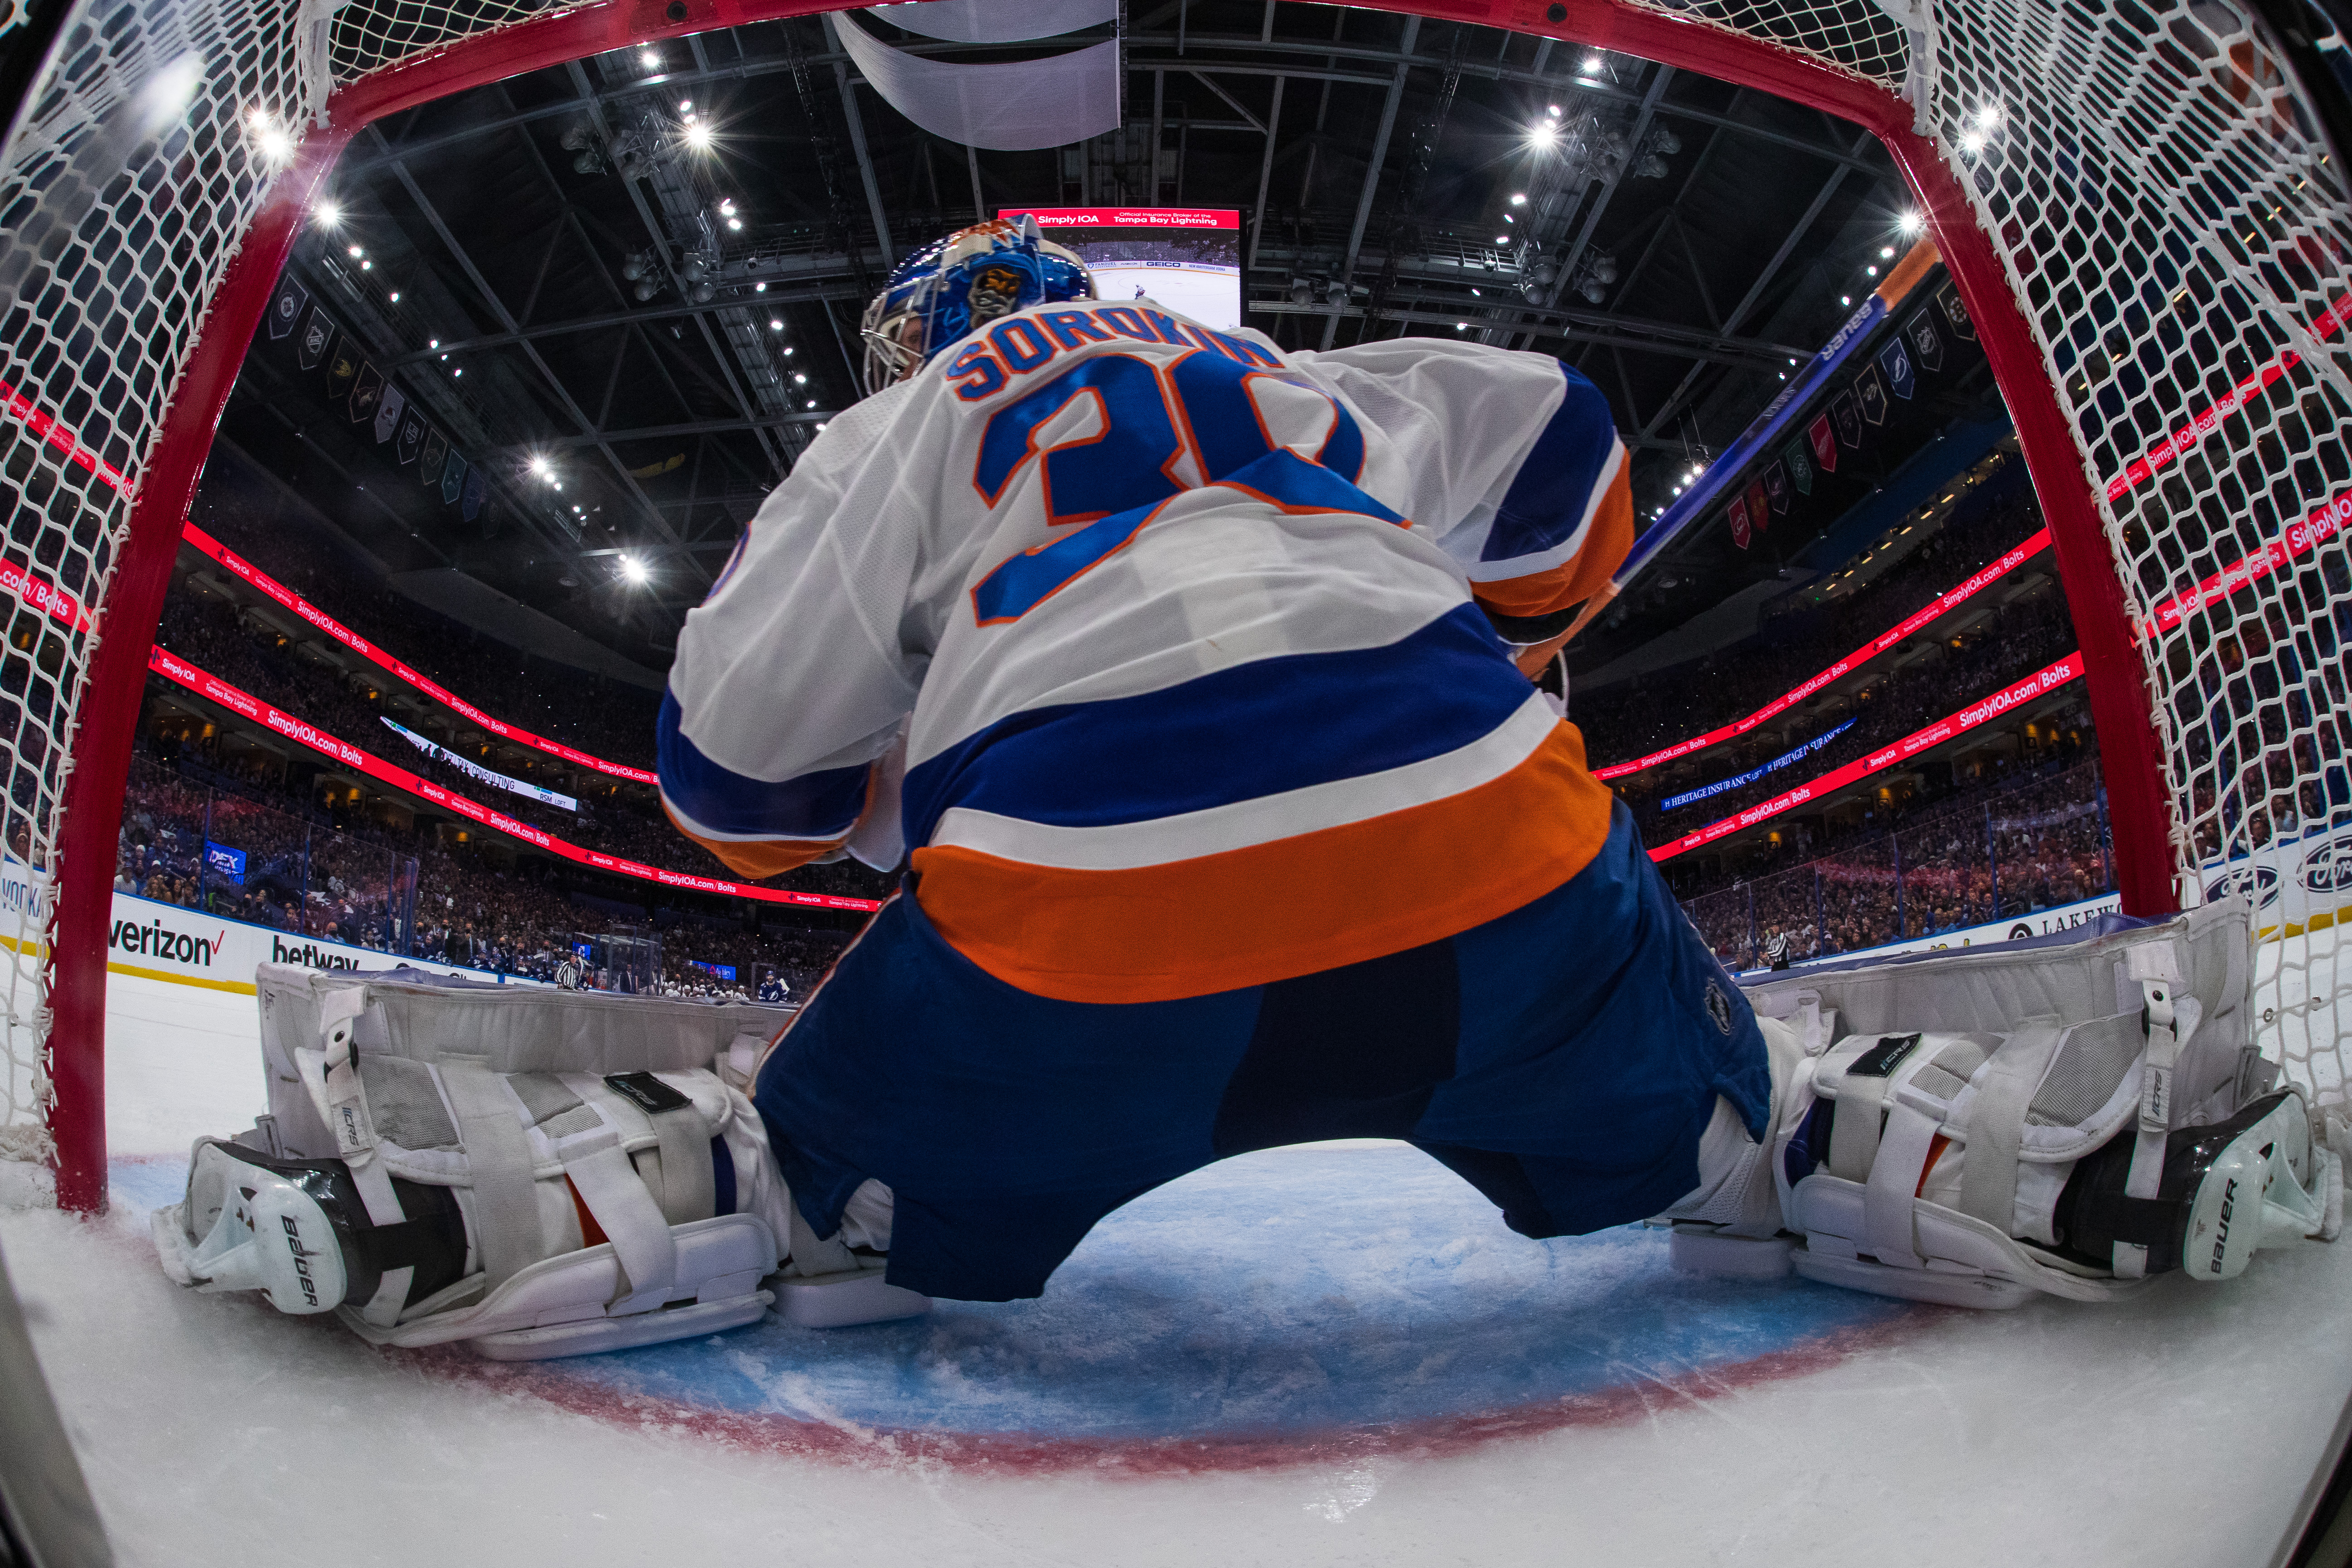 Goalie Ilya Sorokin #30 of the New York Islanders tends net against the Tampa Bay Lightning in Game Five of the Stanley Cup Semifinals of the 2021 Stanley Cup Playoffs at Amalie Arena on June 21, 2021 in Tampa, Florida.